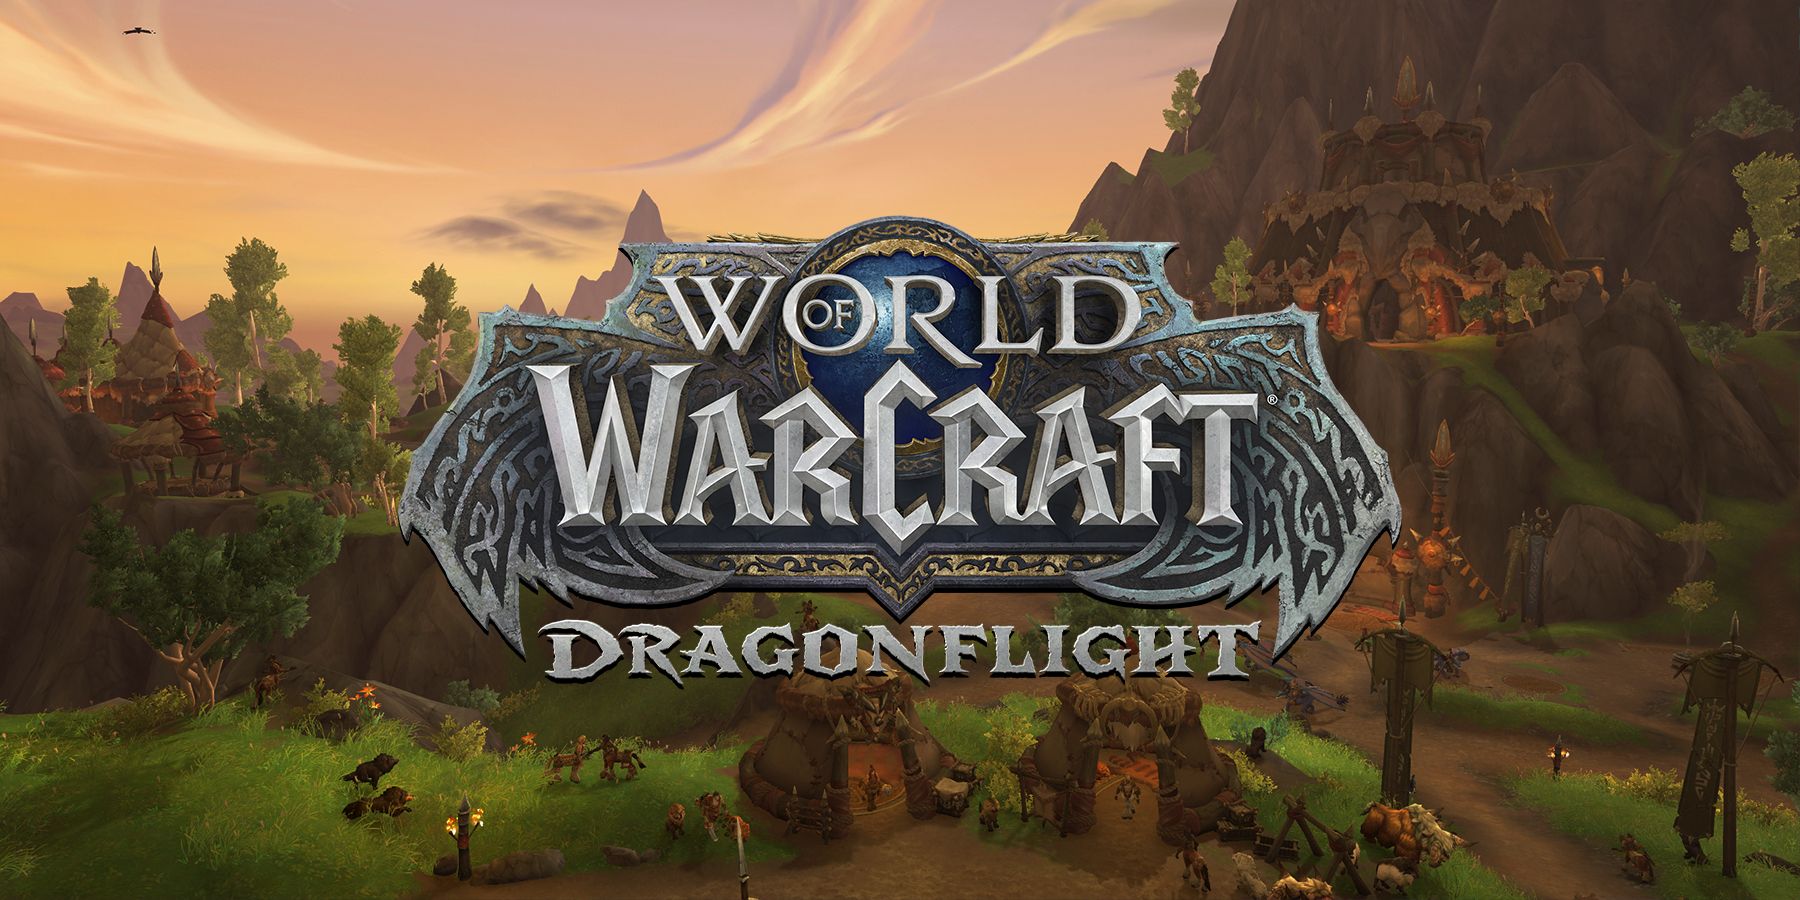 wow world of warcraft dragonflight new affixes for mythic season 2 10.1